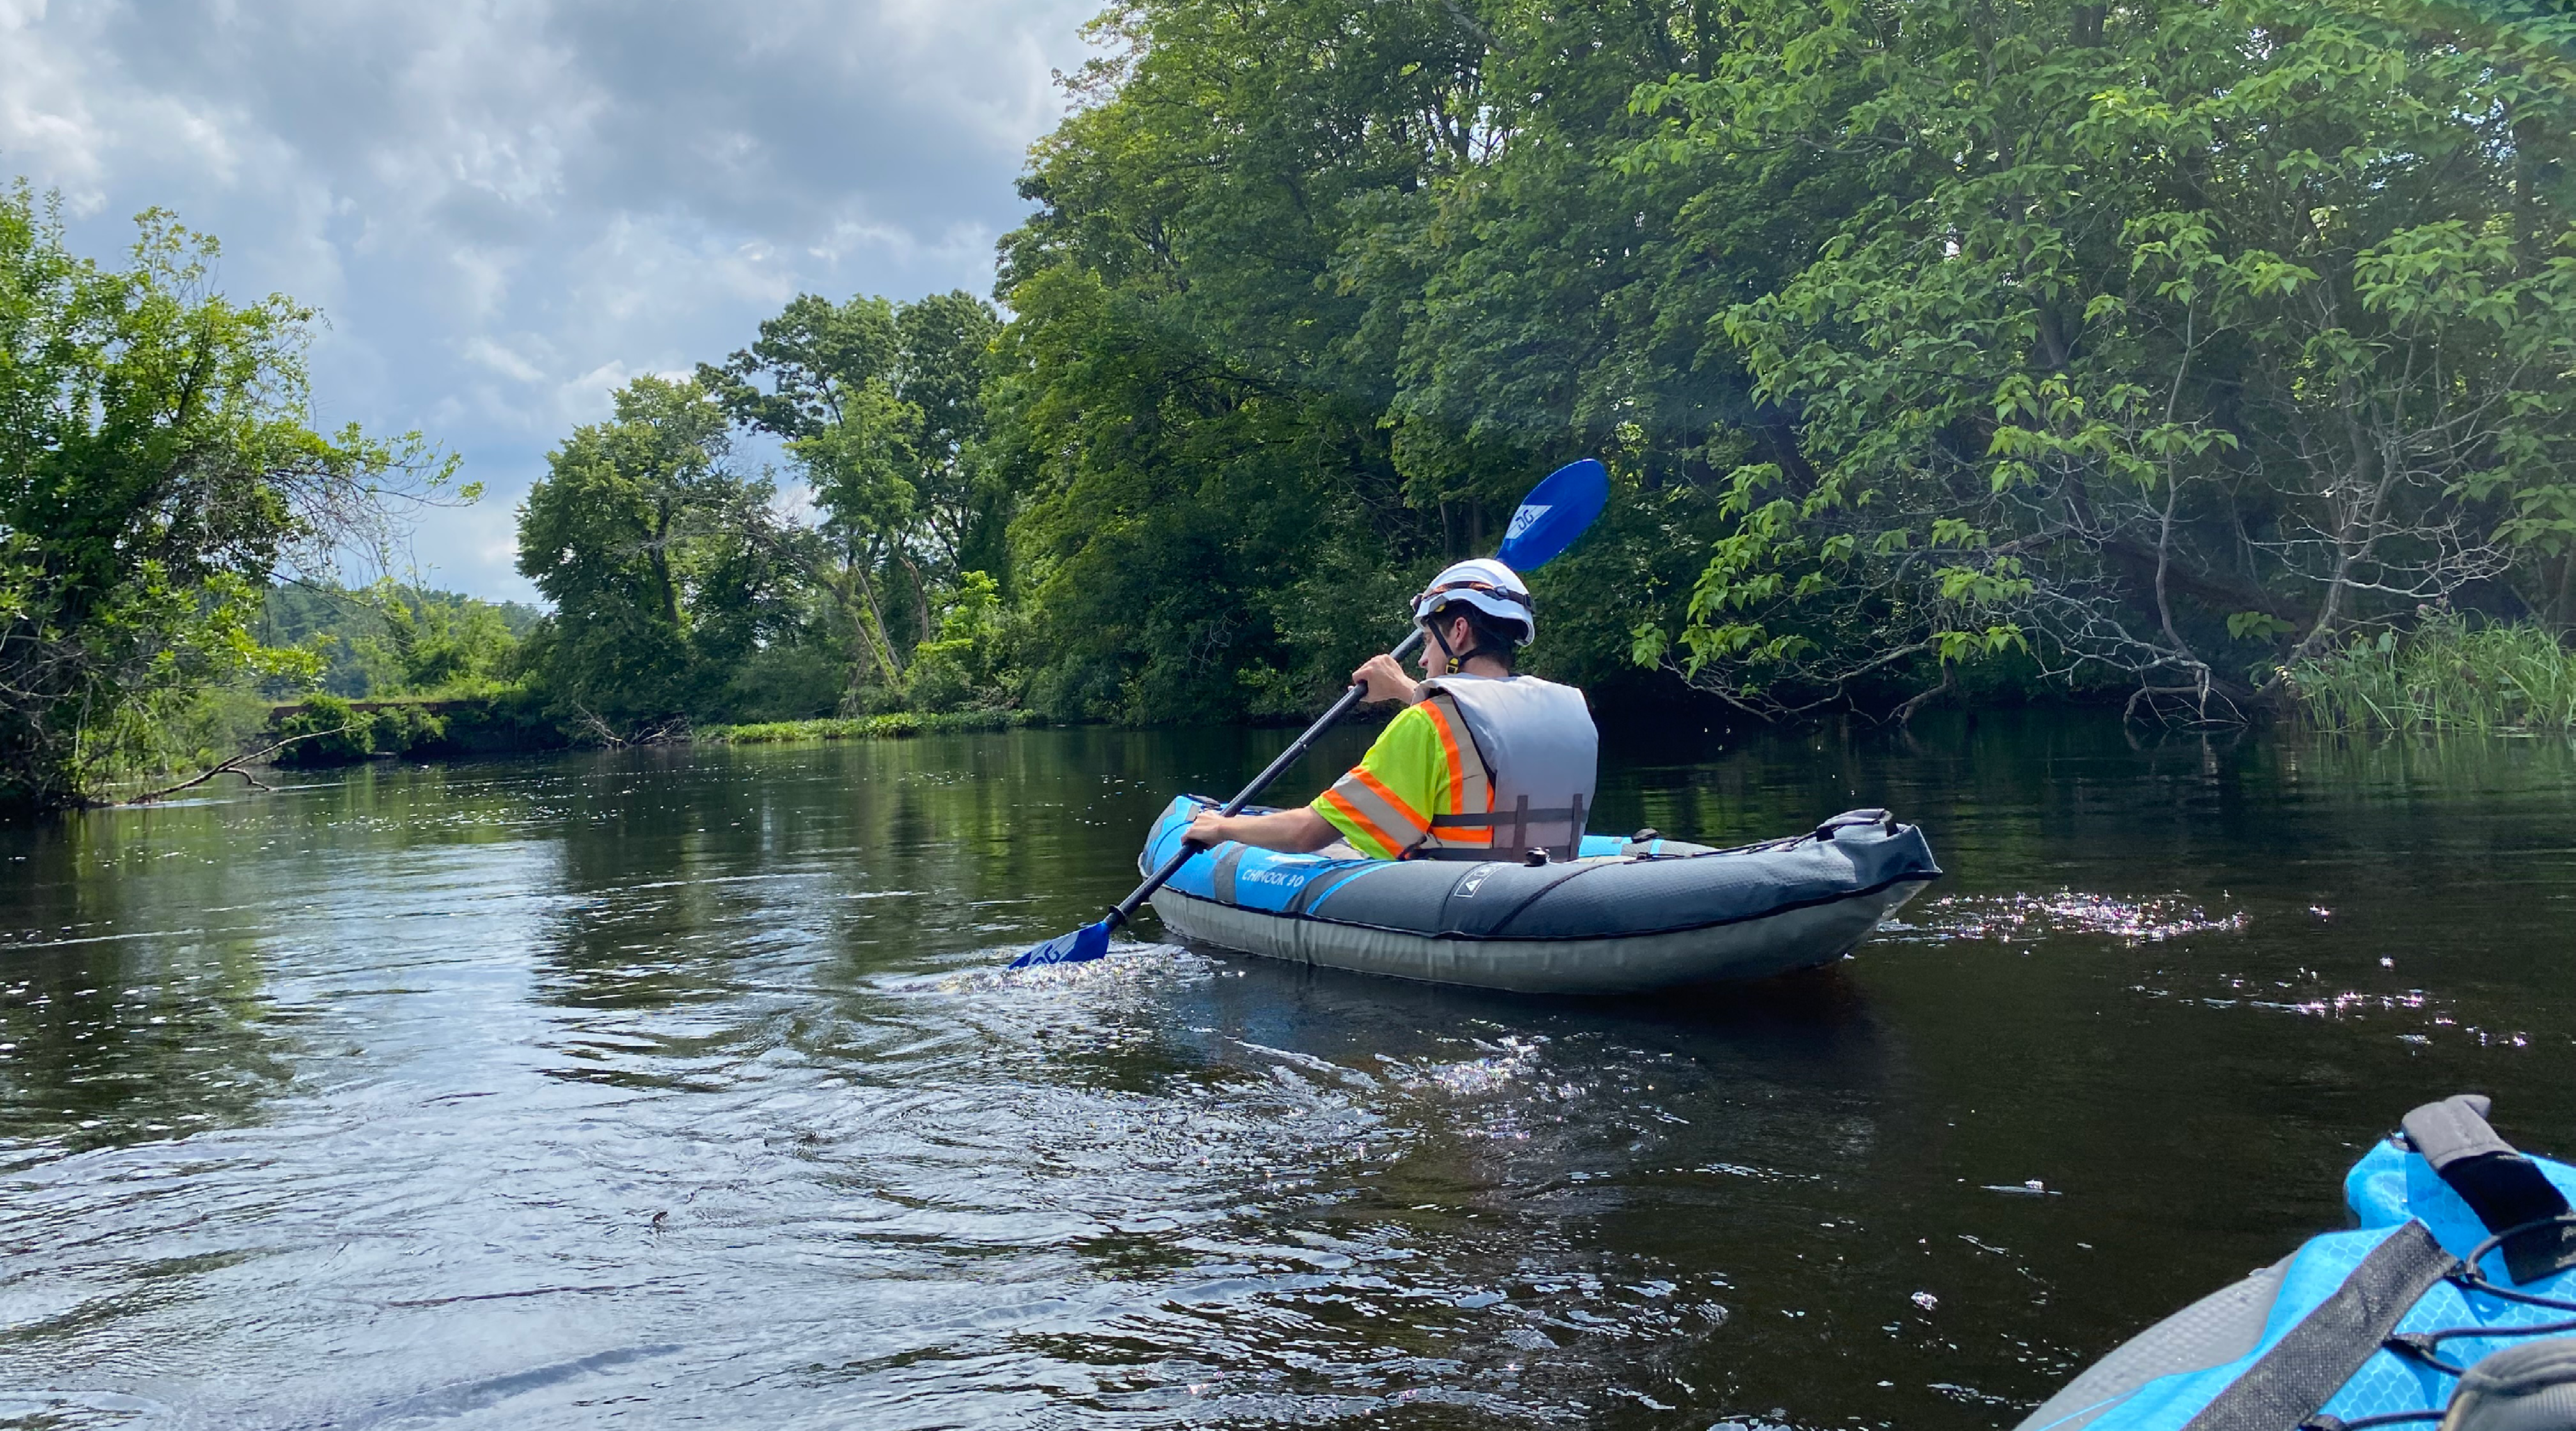 Hoyle Tanner staff kayaking to a culvert inspection on a river in Chelmsford, MA.